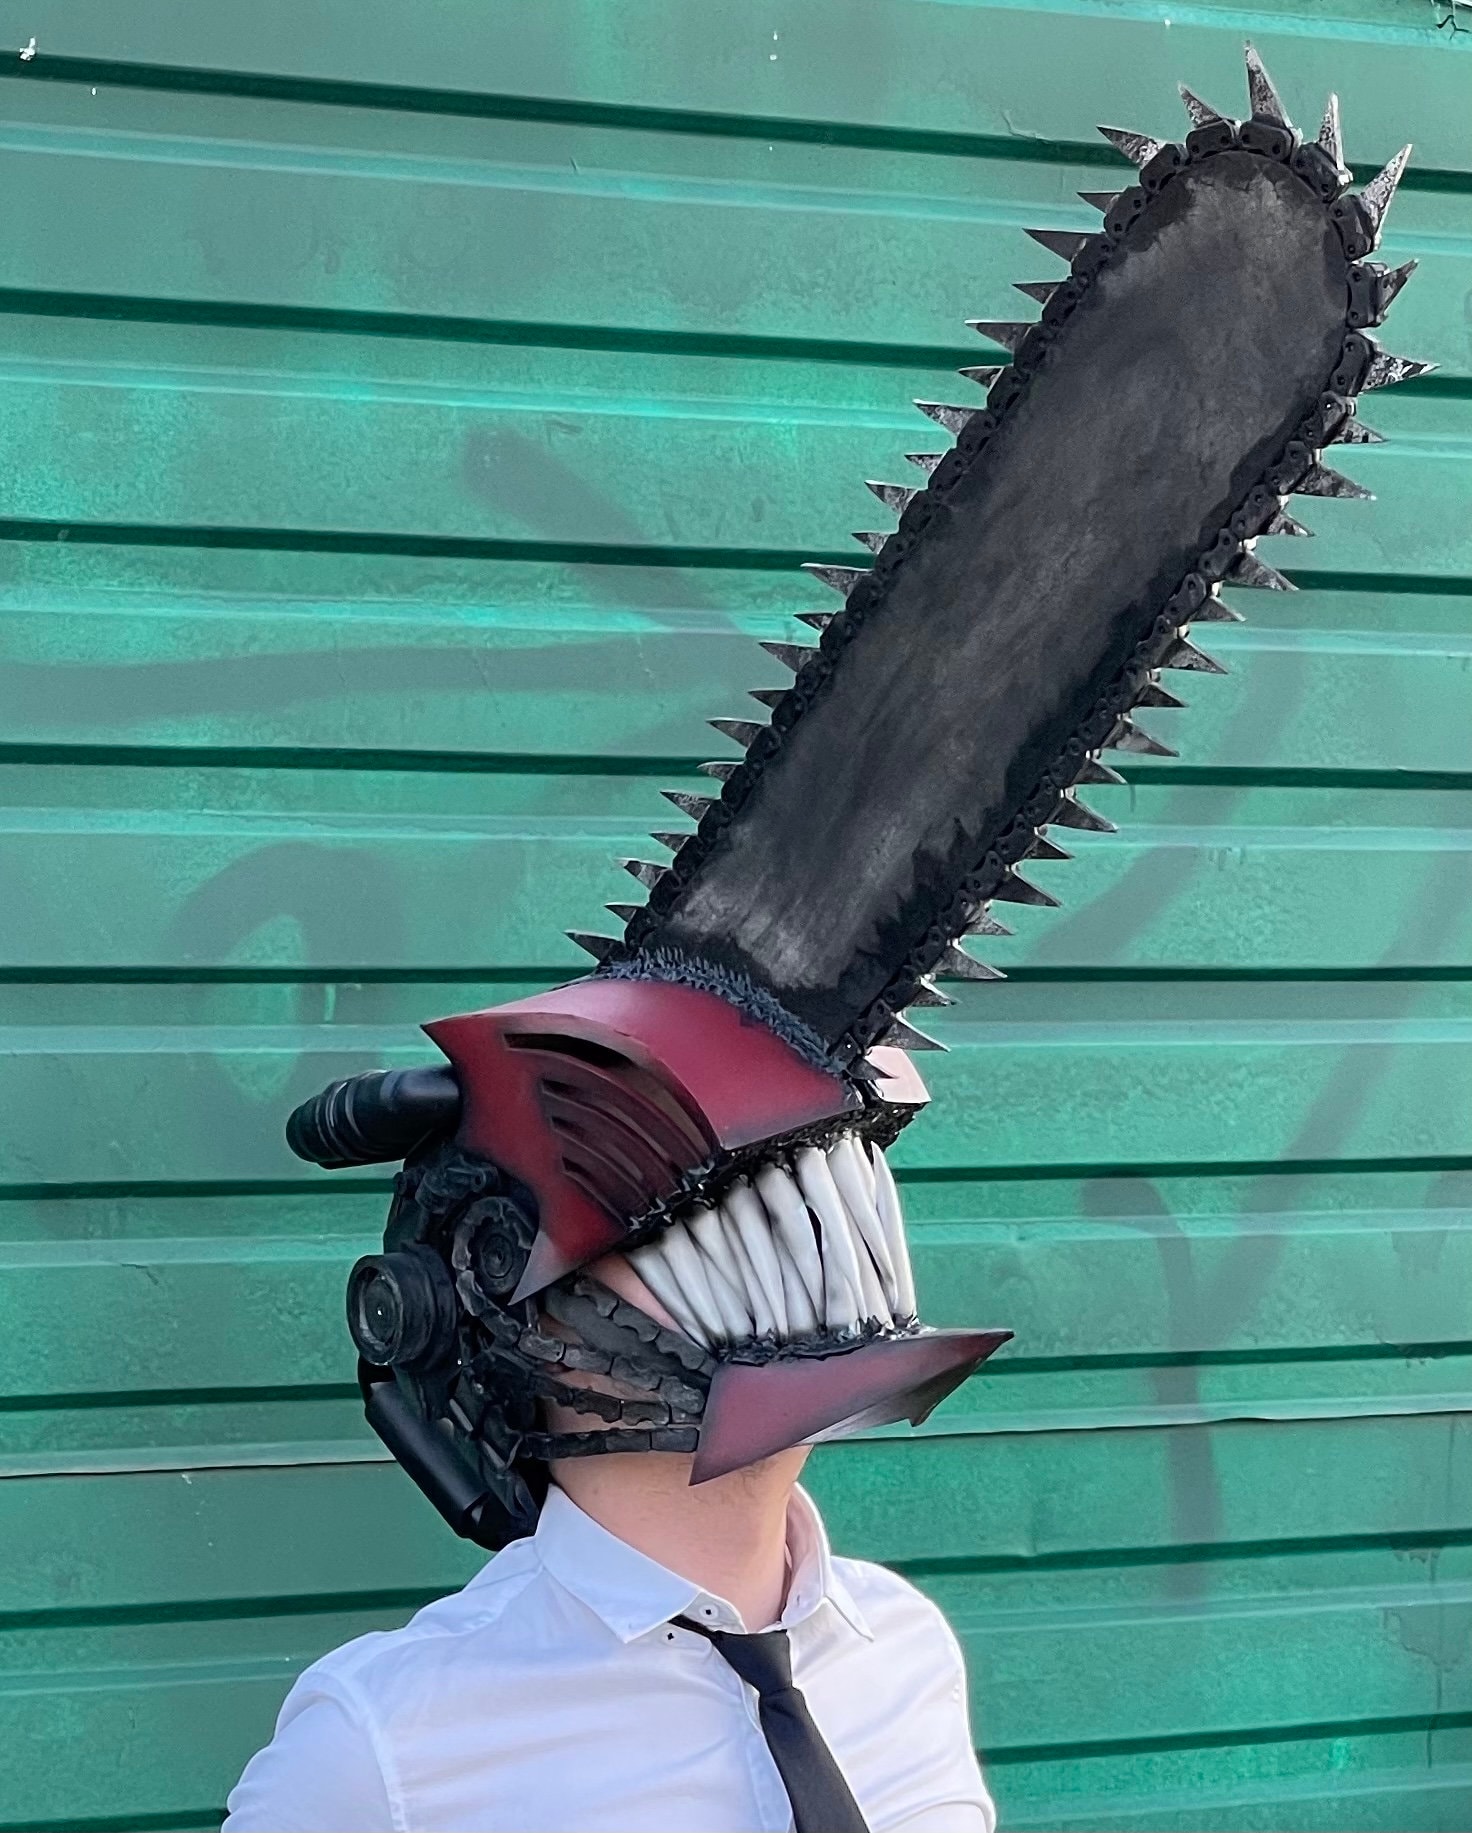 Chainsaw Man cosplay Helmet and Saws 